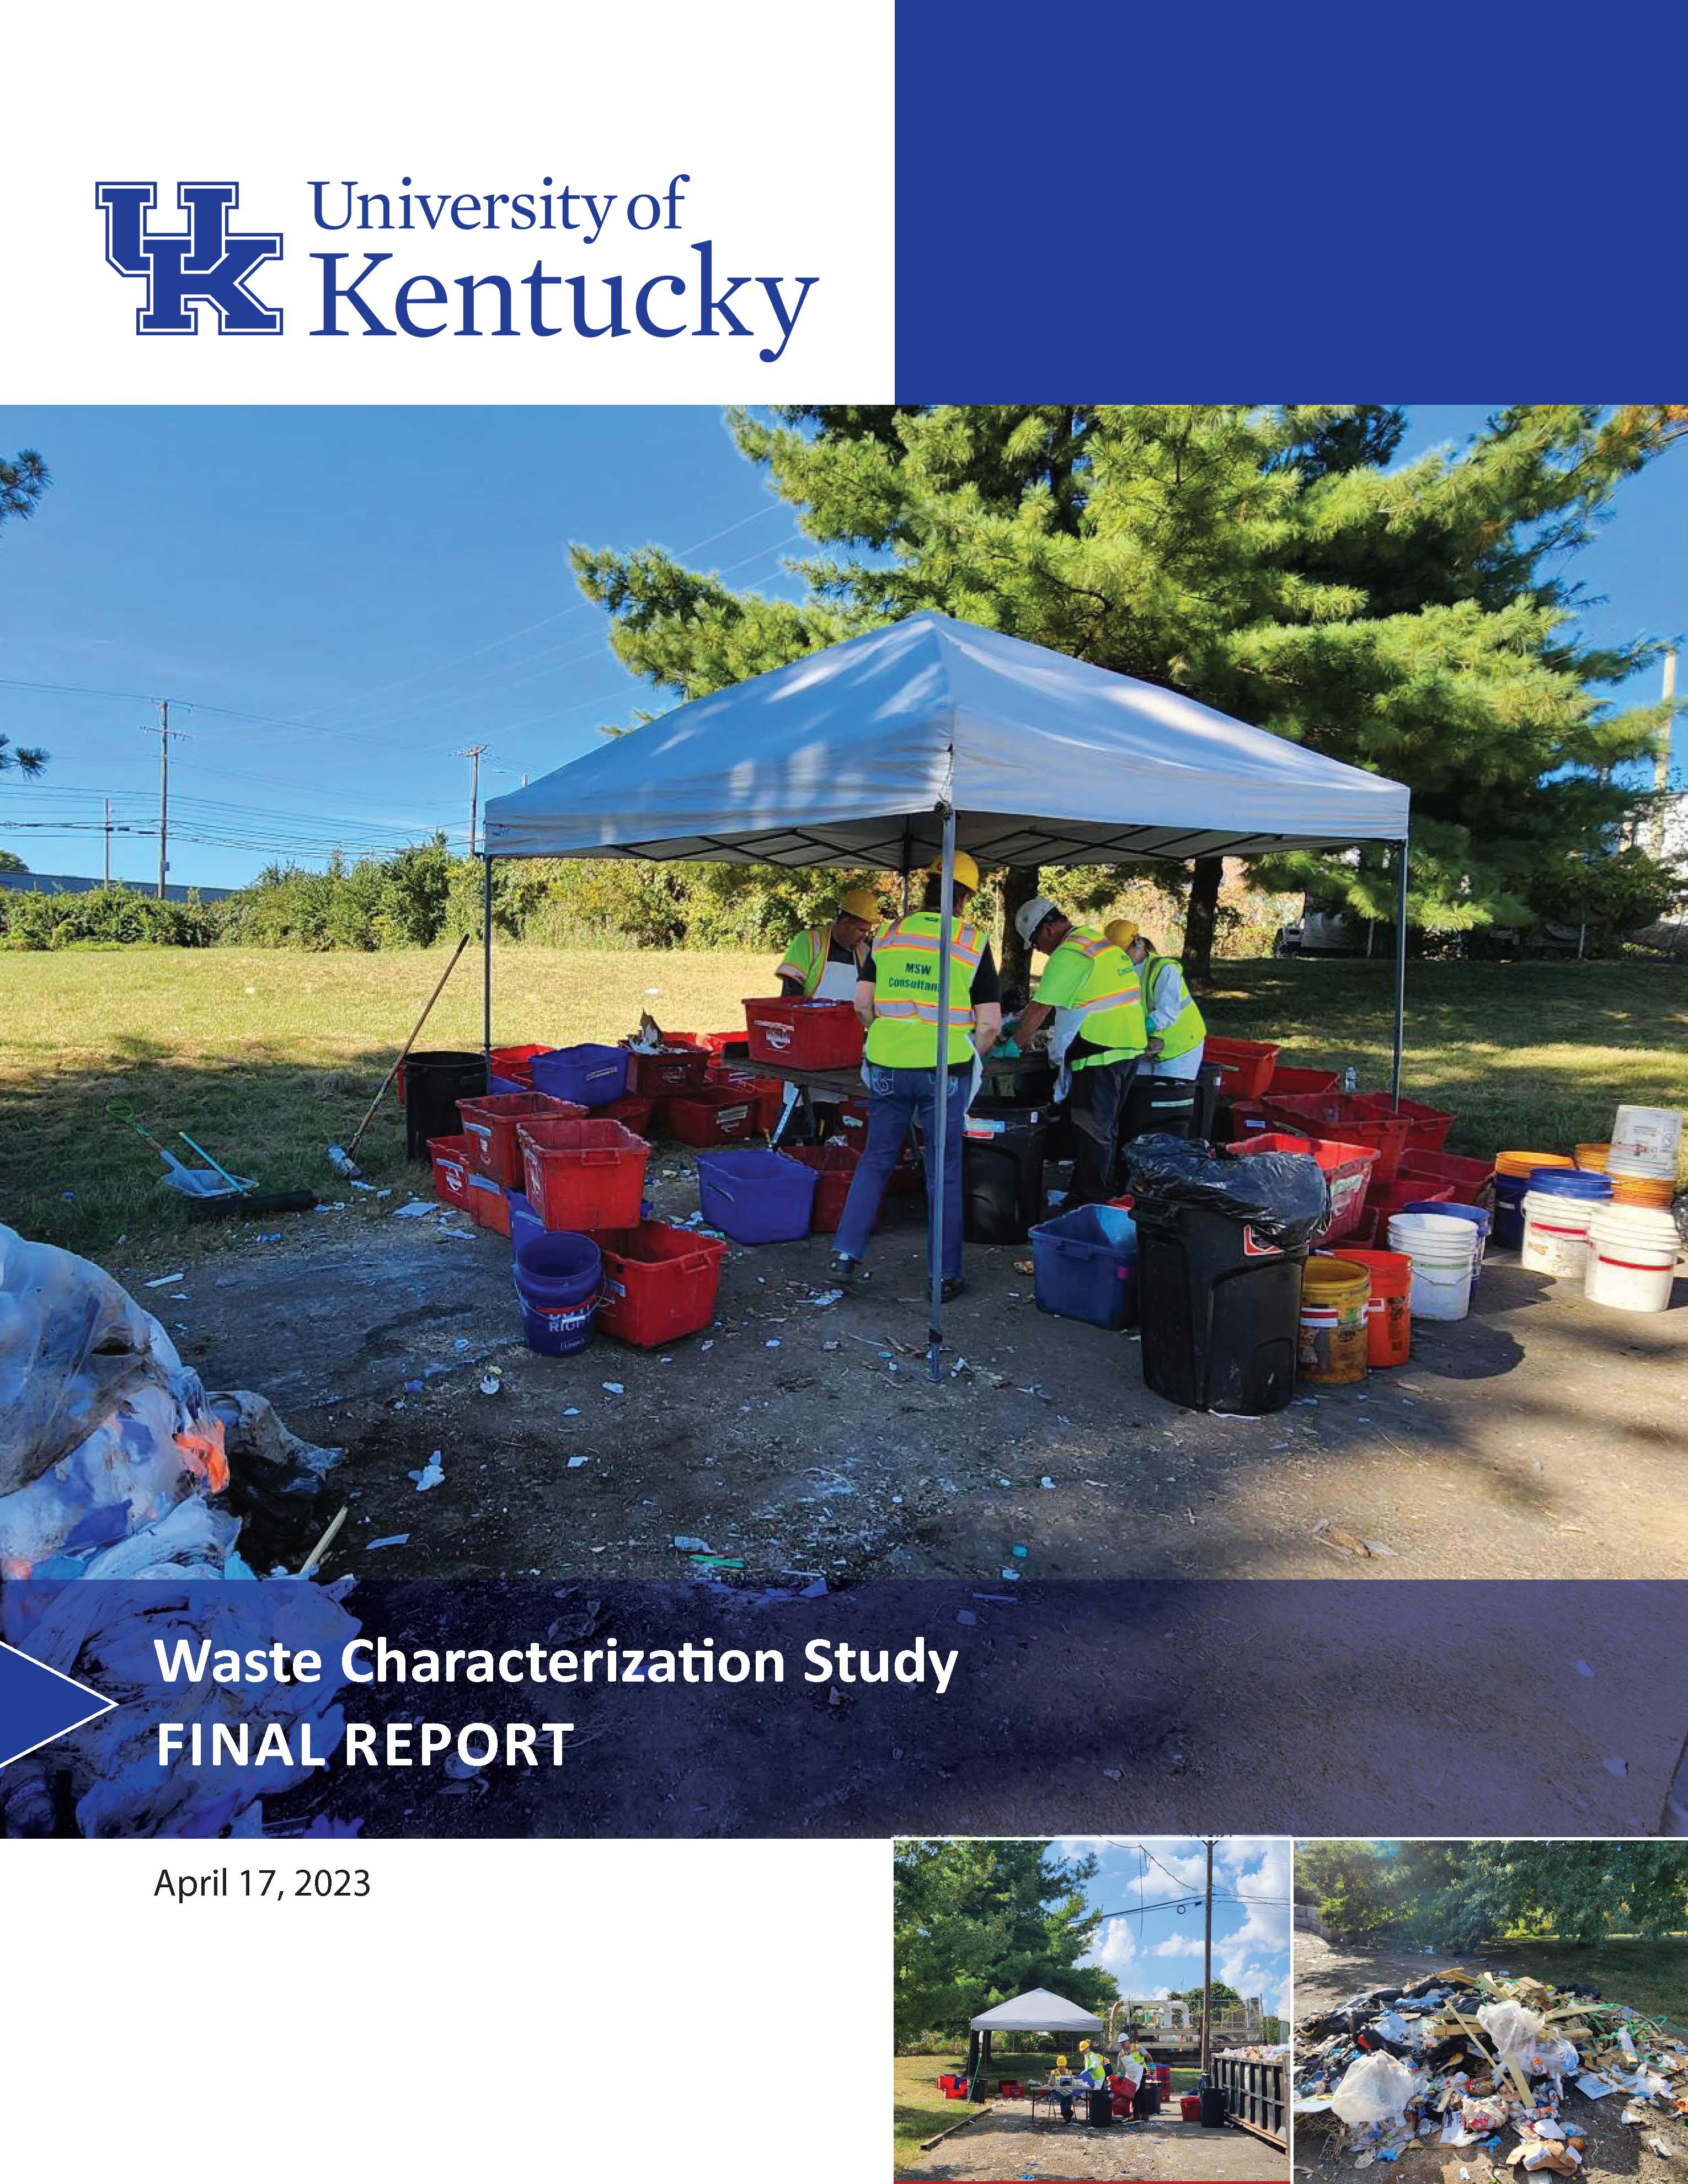 Front cover over the 2022 Waste Characterization Study report for University of Kentucky Recycling department by MSW Consultants 